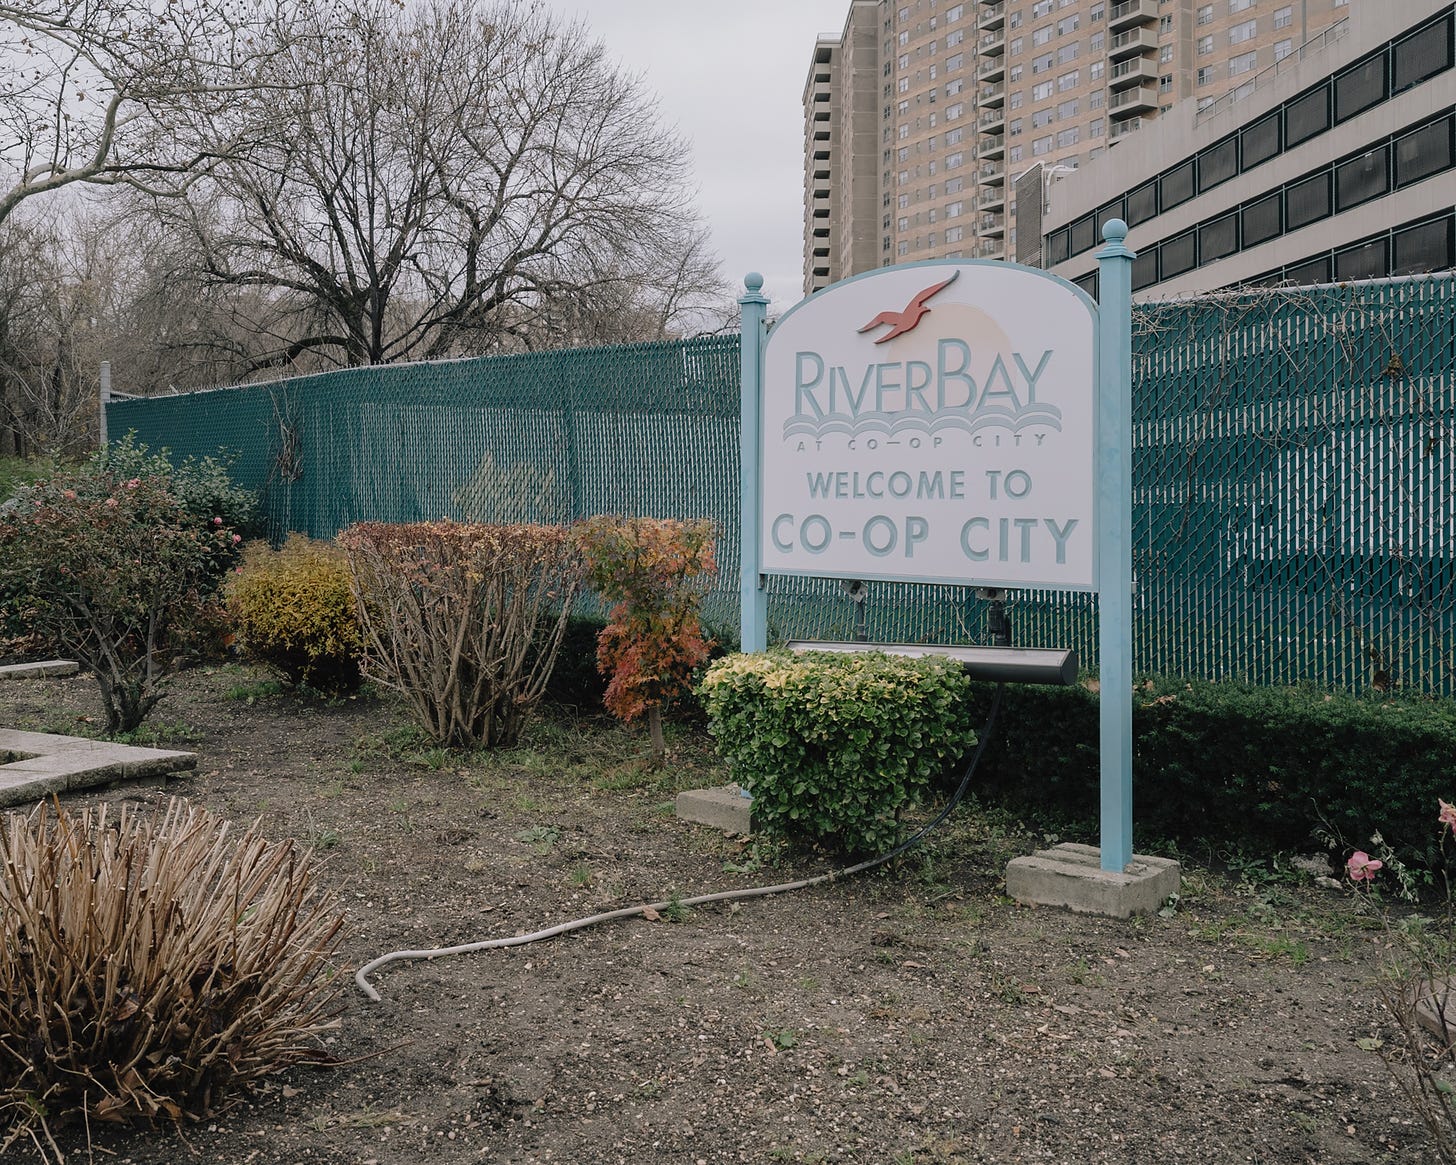 RiverBay Welcome to Co-op City sign